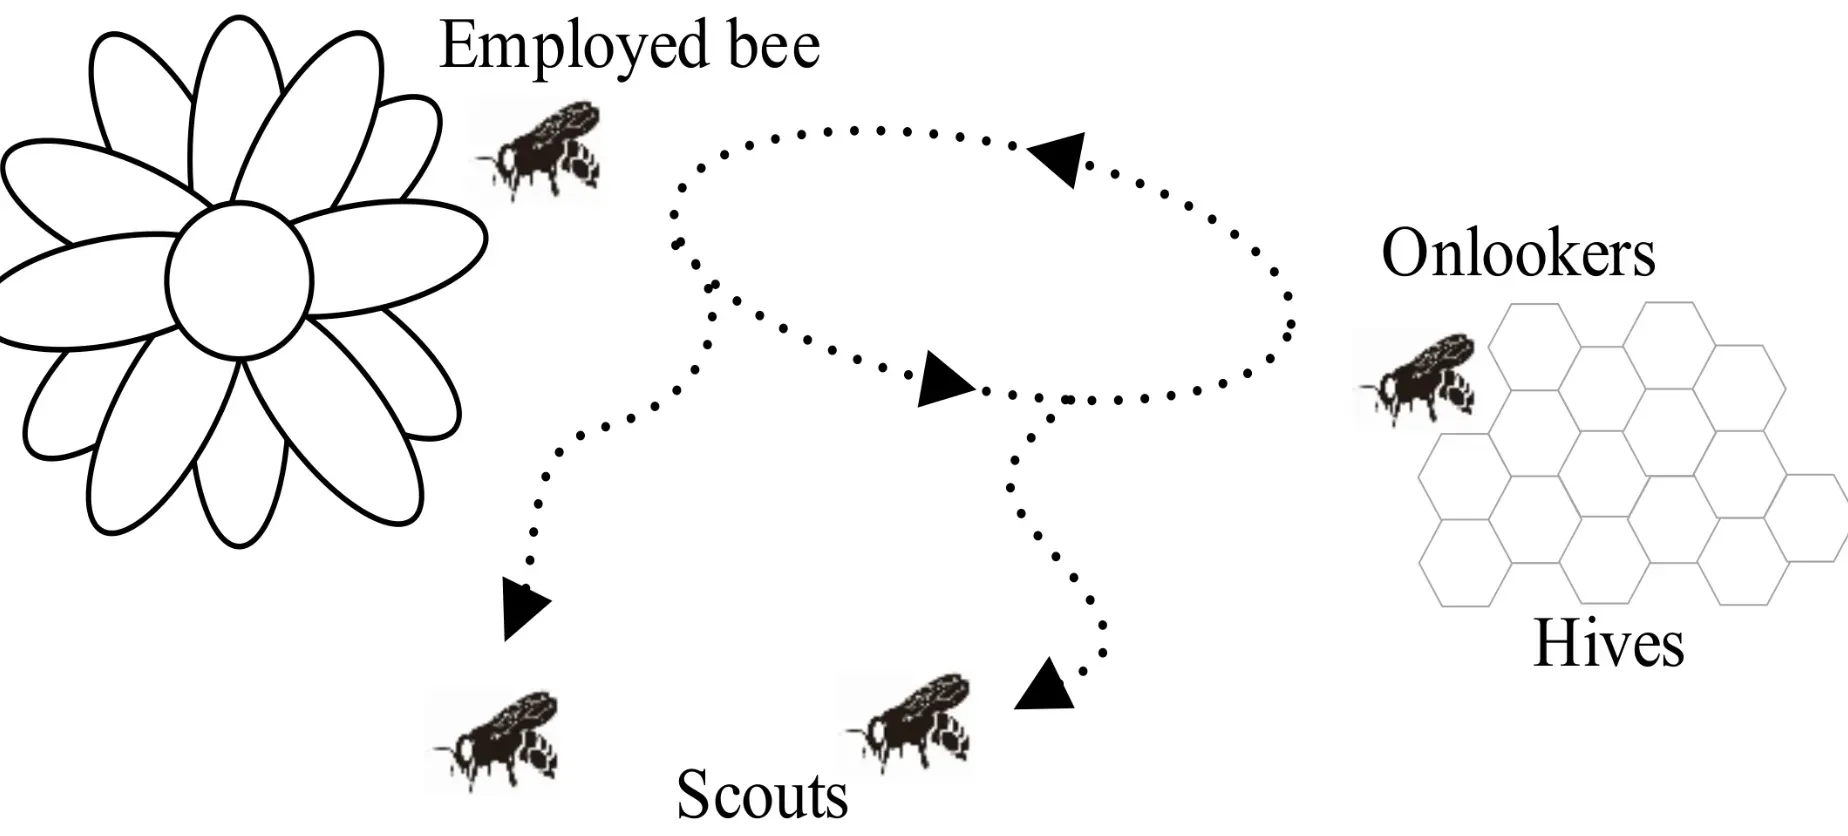 Core Components of the Bees Algorithm